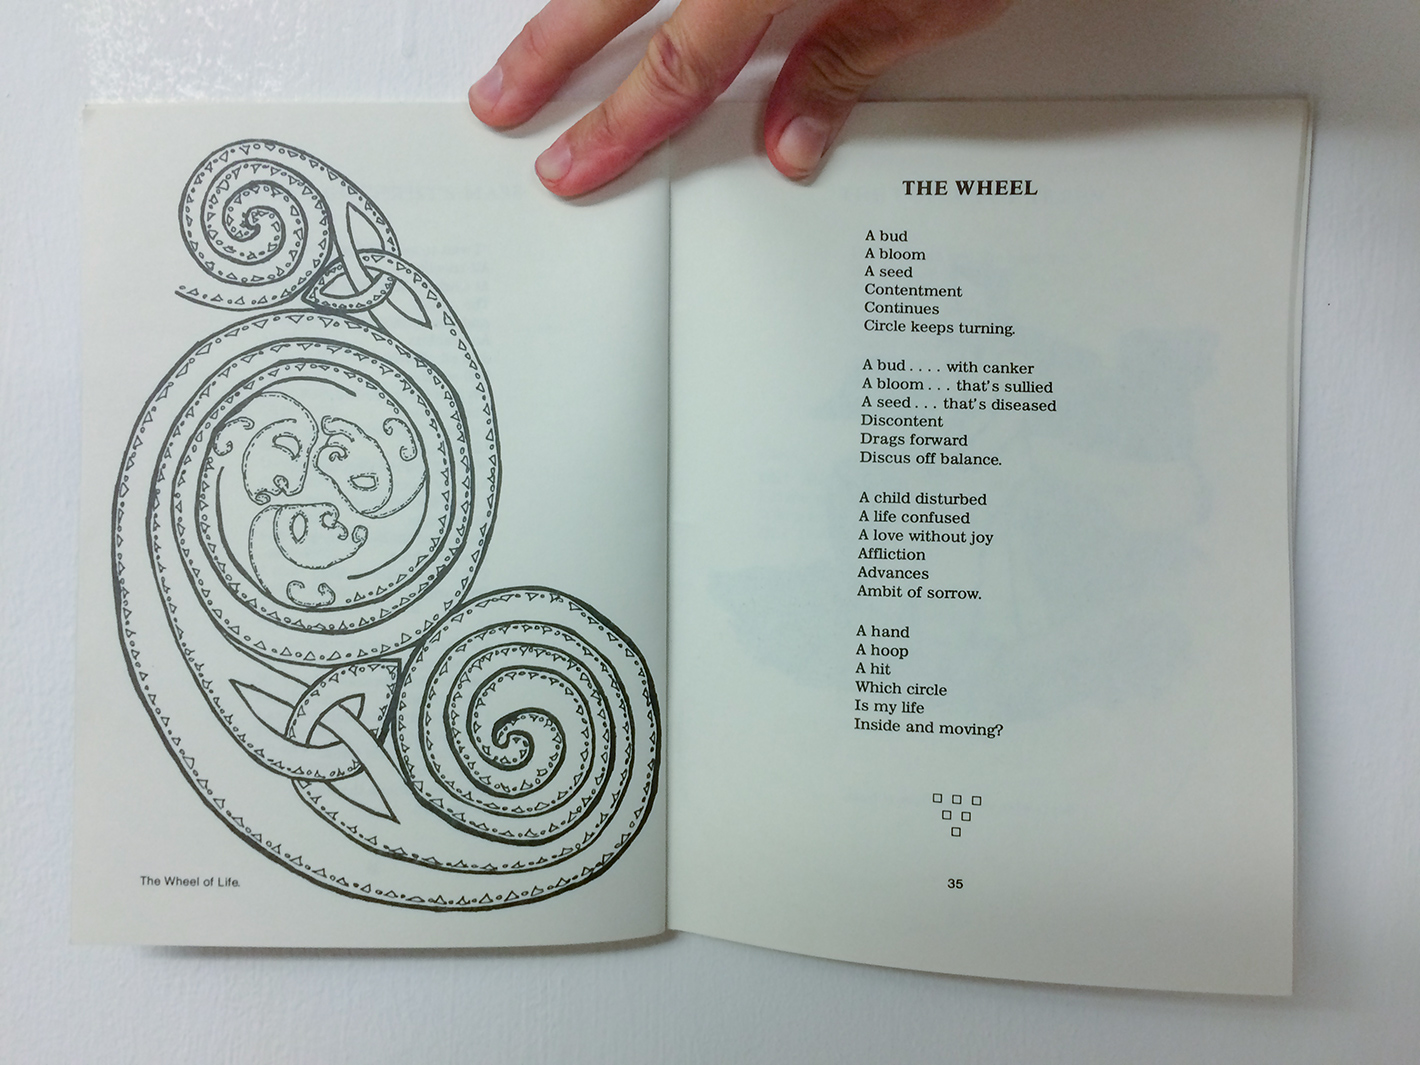 page 36: illustration "The Wheel of Life" – page 37: poem "The Wheel"